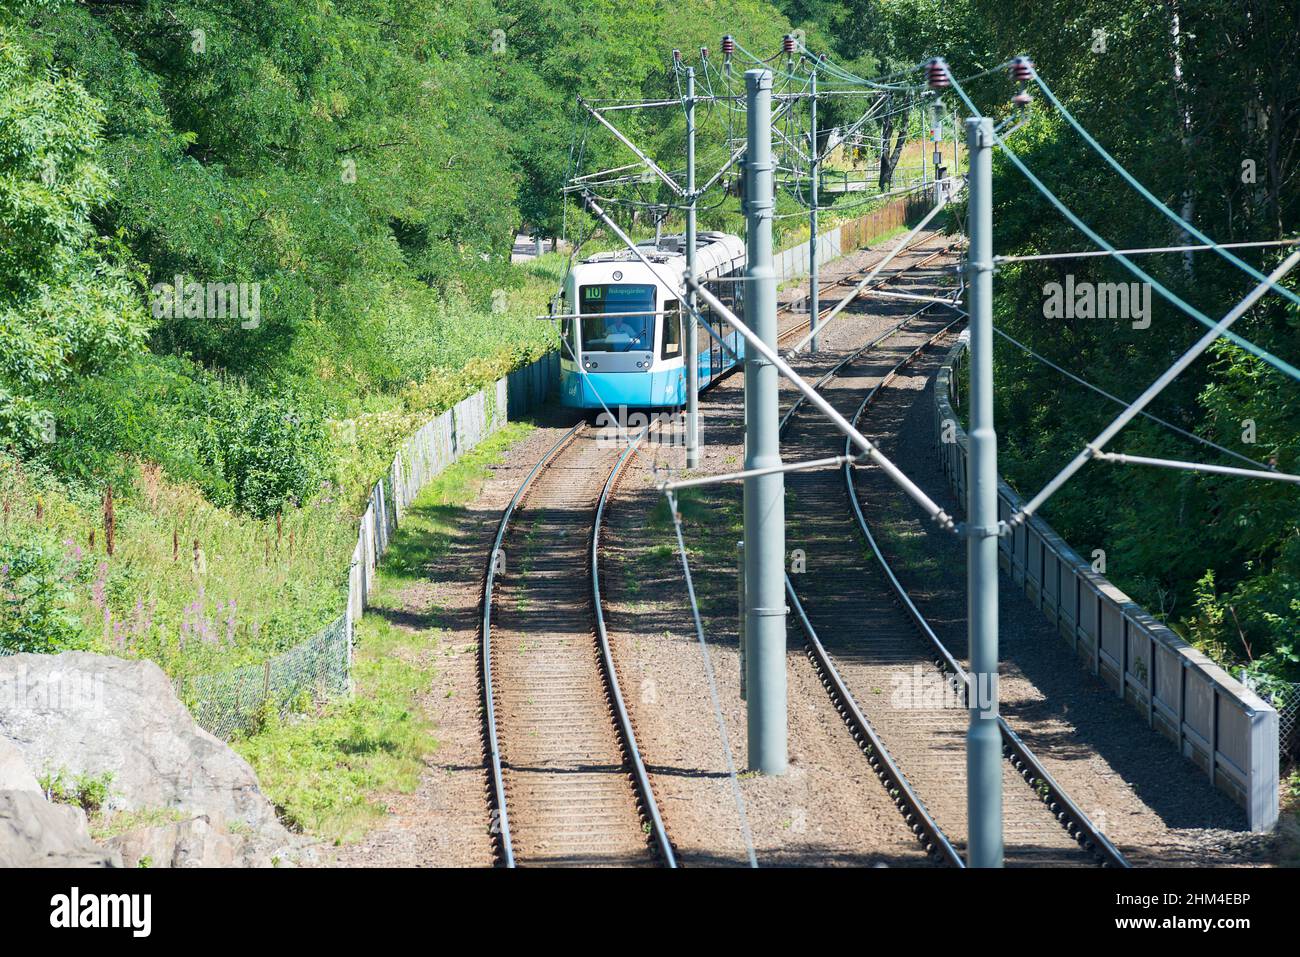 Trams in a suburb of Göteborg, Sweden Stock Photo